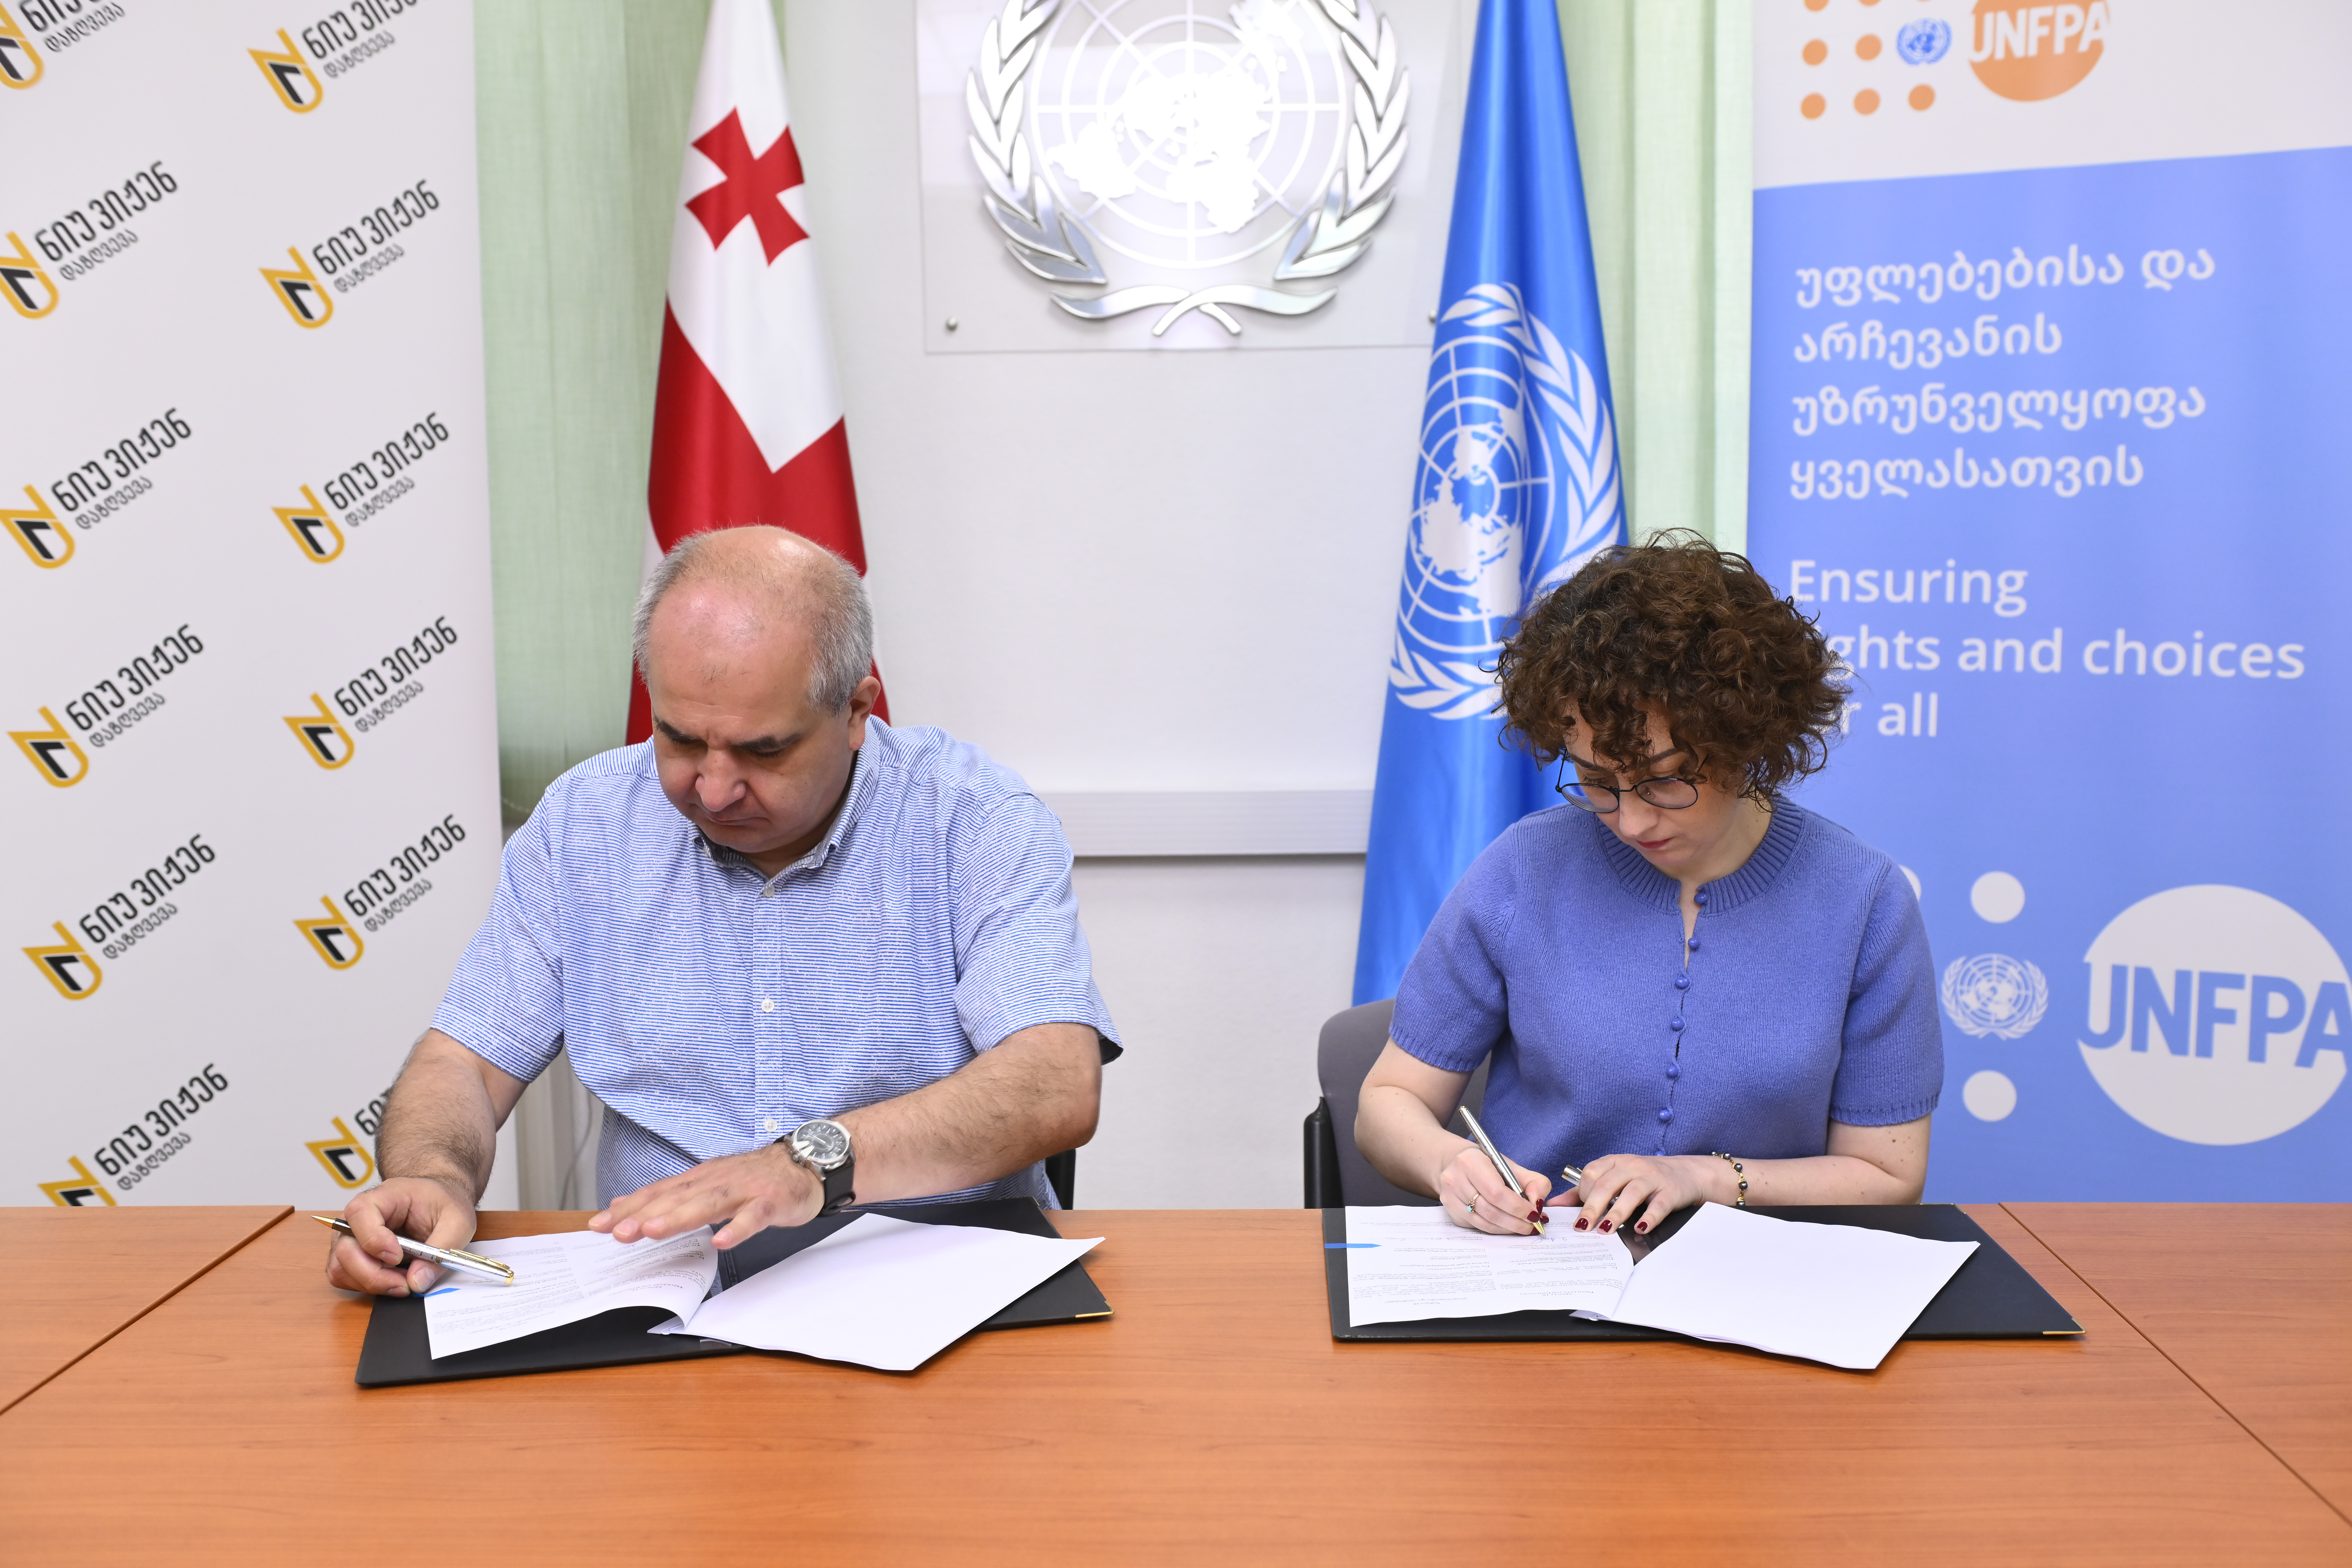 Medical Director of New Vision Insurance and Head of UNFPA Georgia Country Office sign memorandum